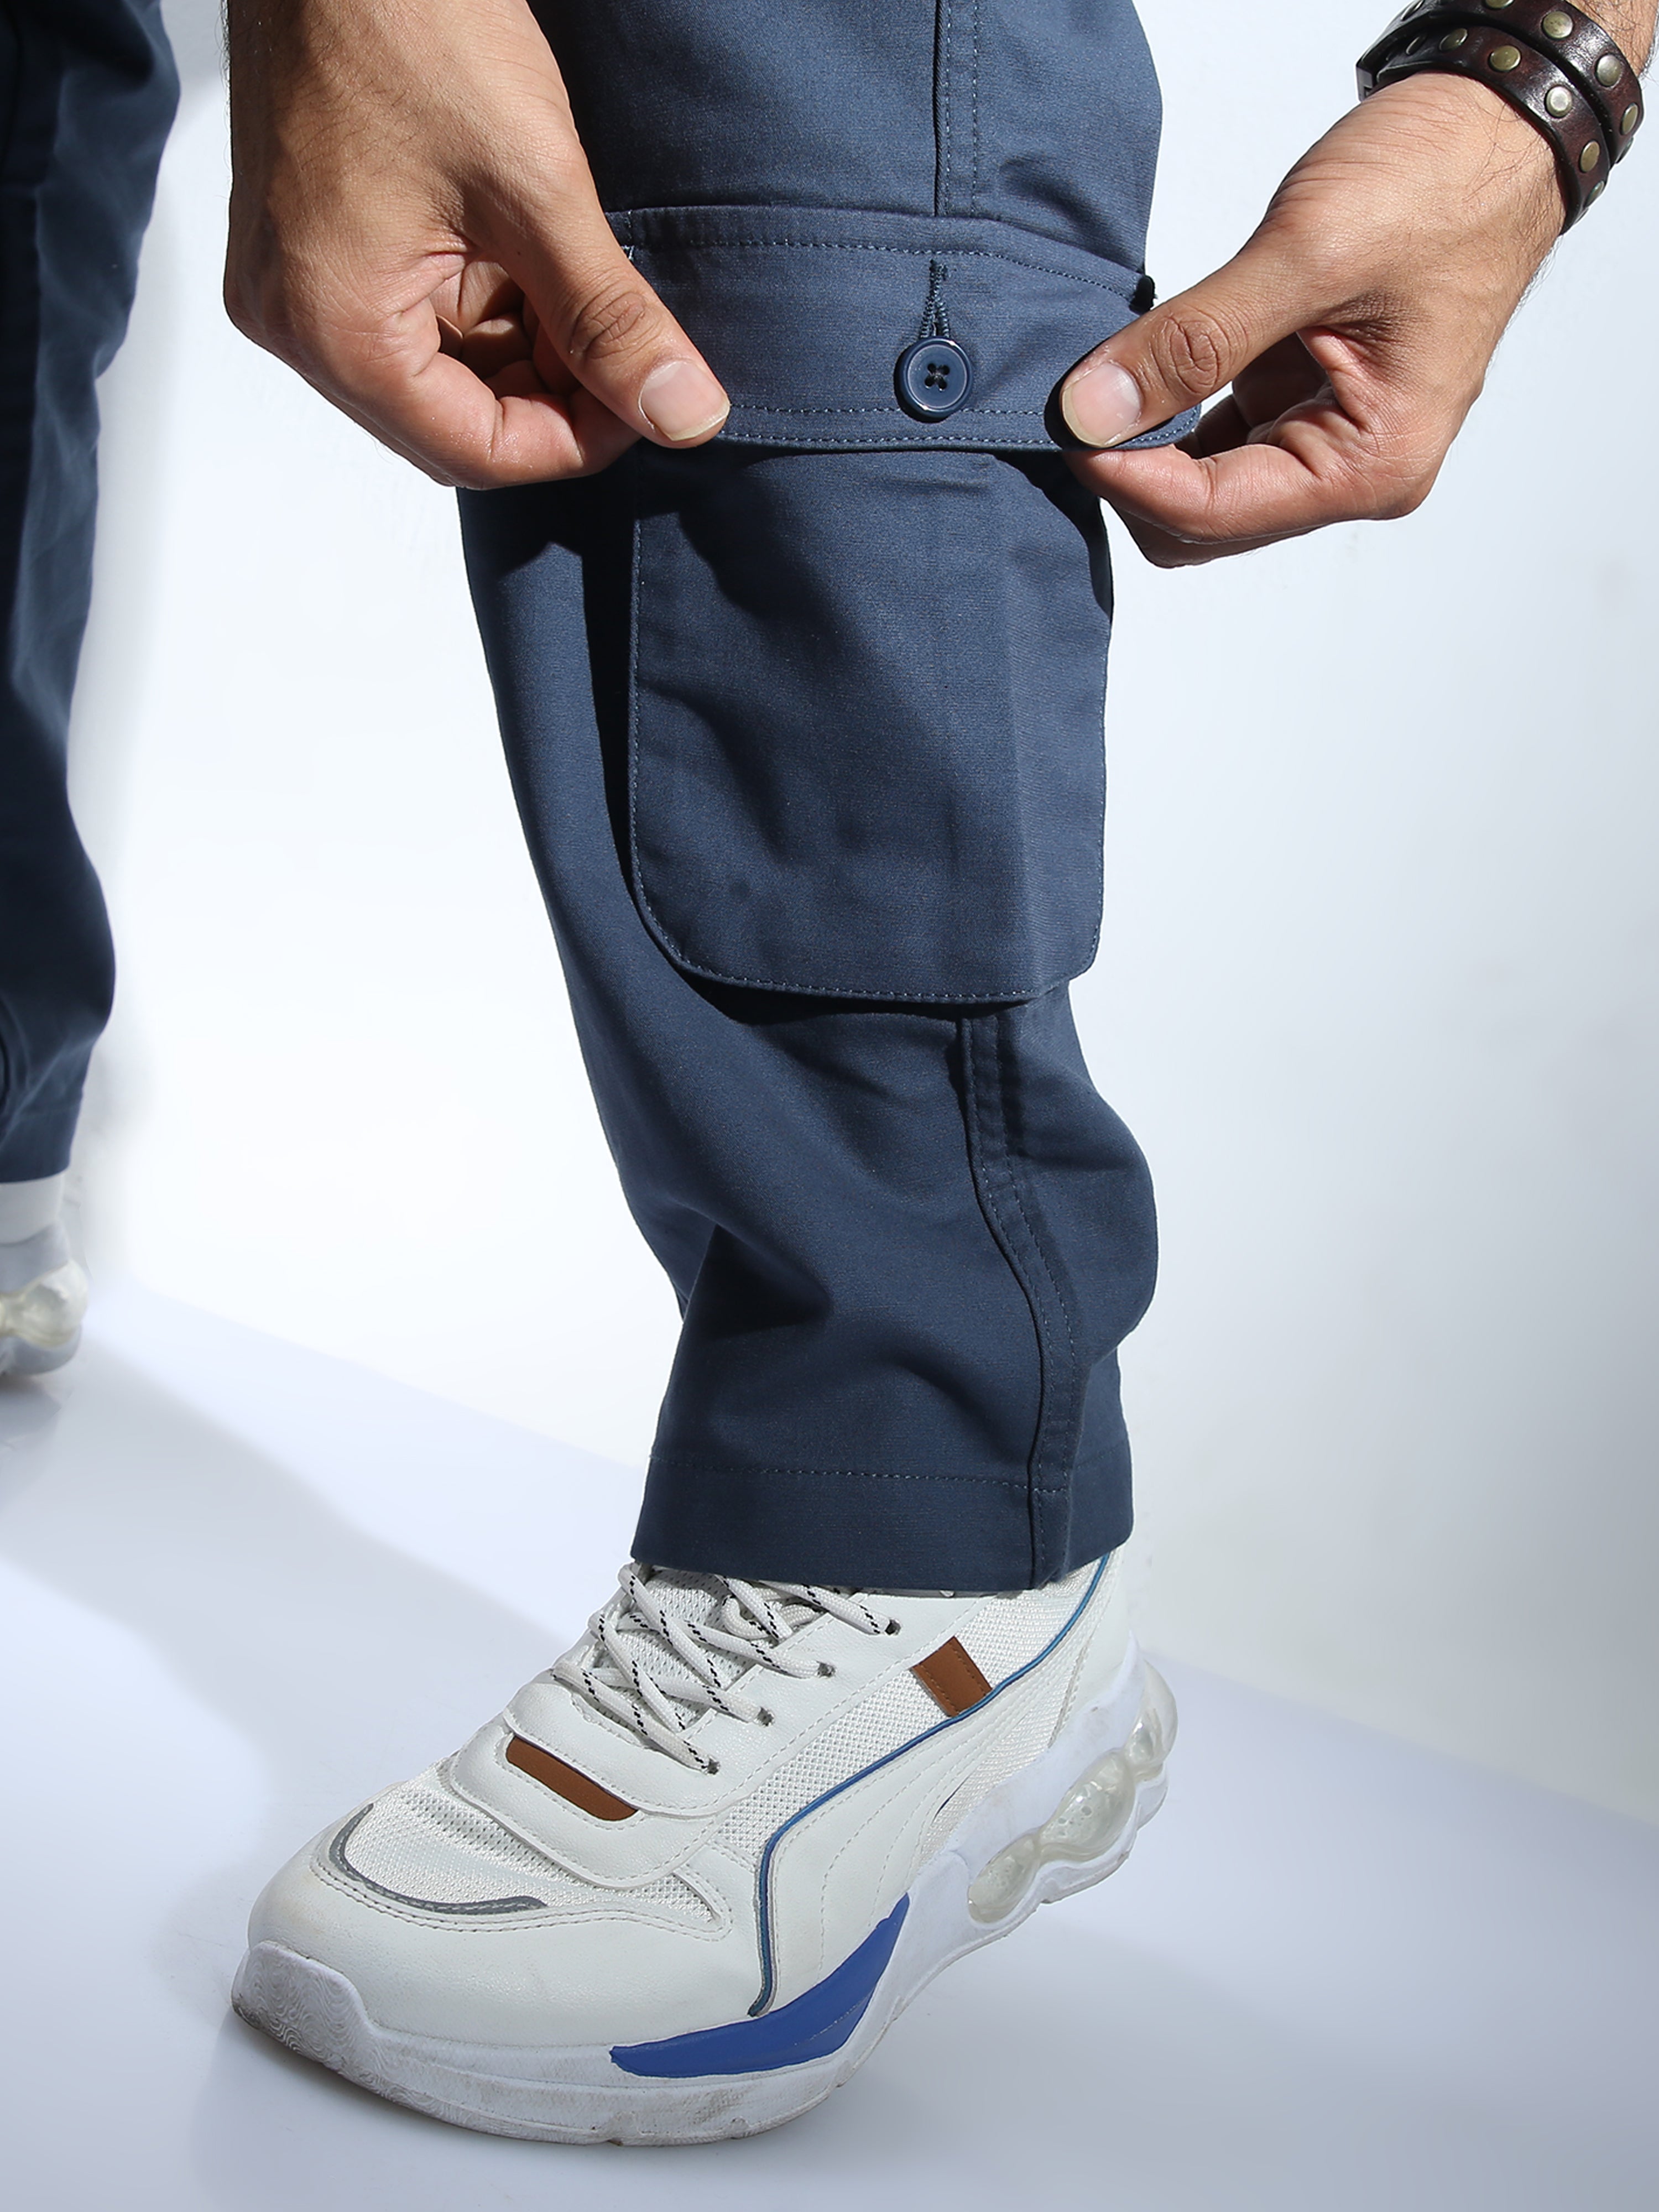 Buy Navy Blue Stretch Six Pocket Cargo Pants: Ultimate Style for Everyday  Adventures! – Dvilla